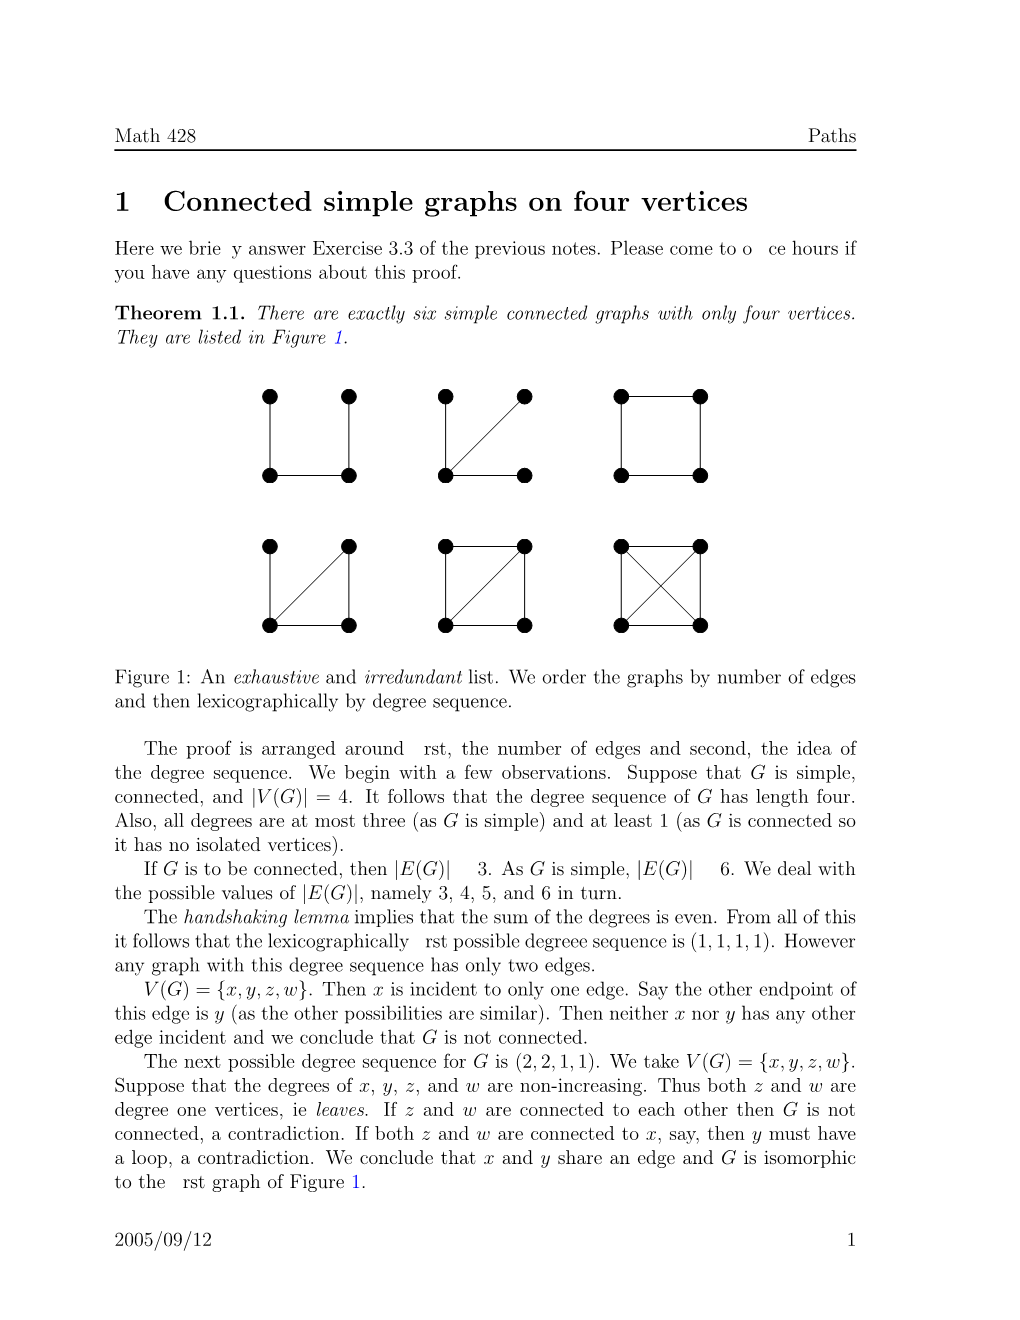 1 Connected Simple Graphs on Four Vertices